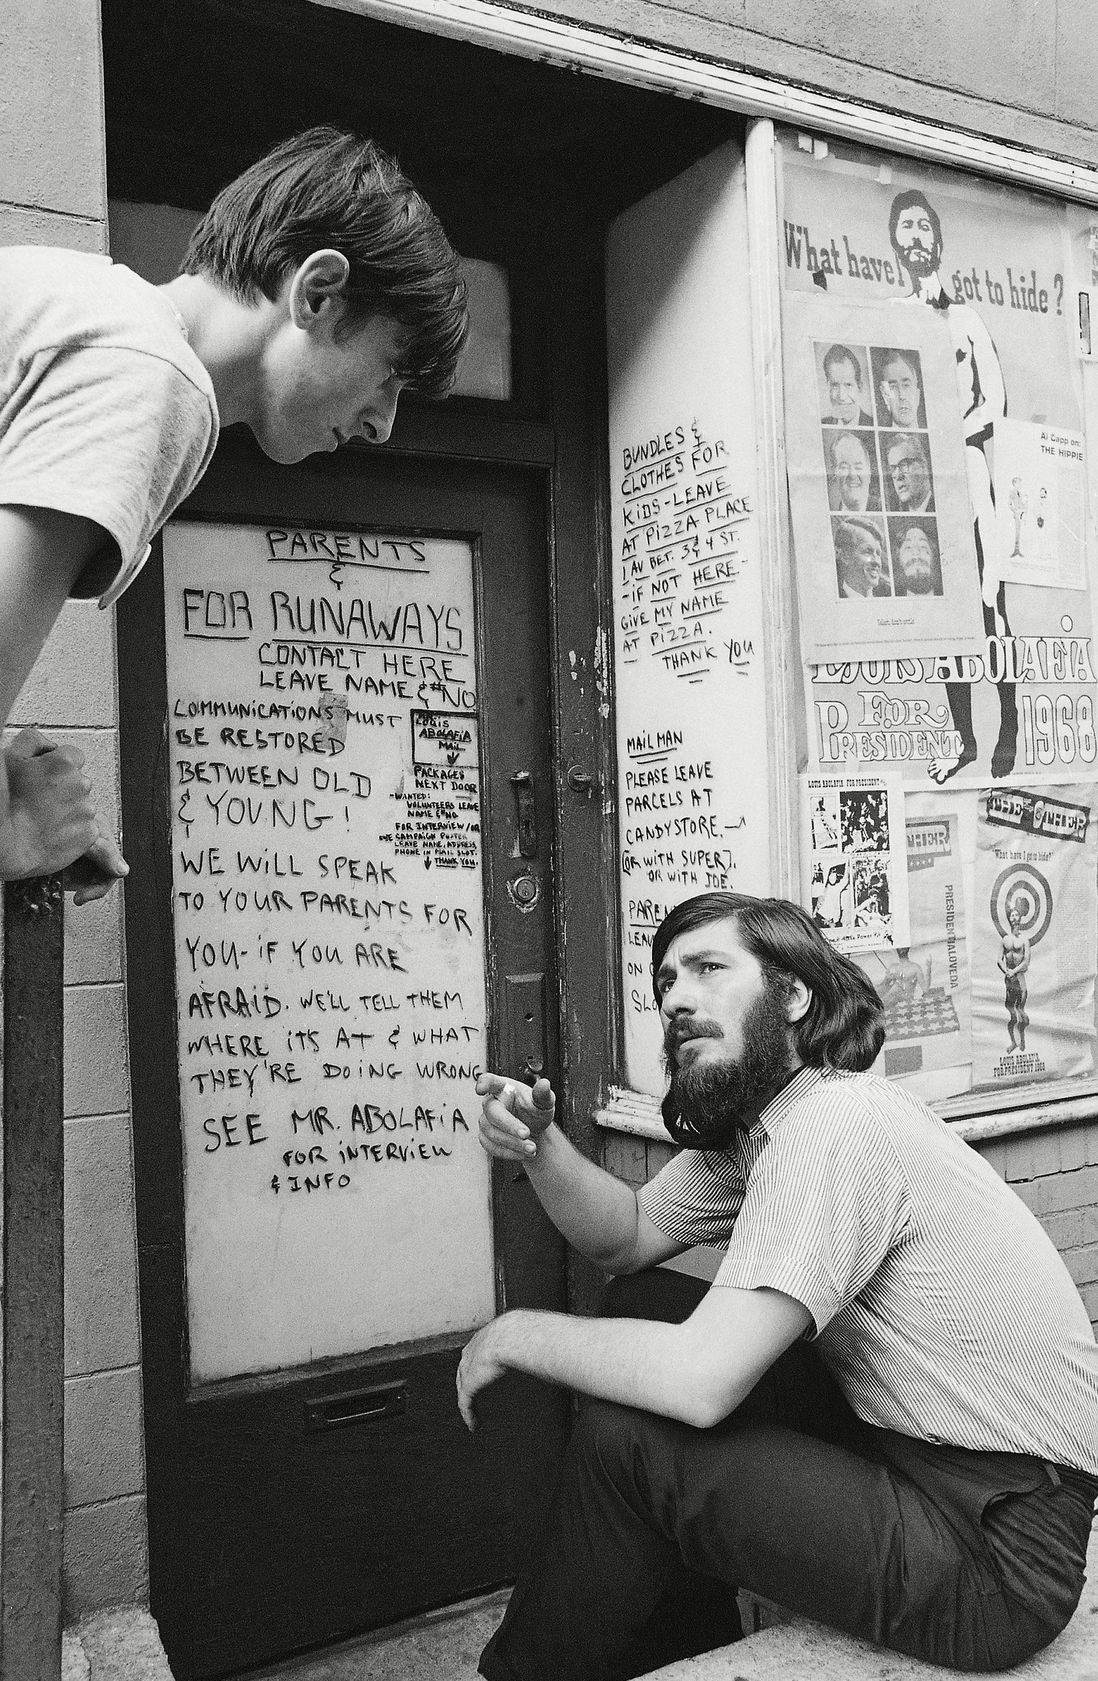 "Louis Abolafia speaks to a young man outside of the clearing house he operates for runaways in the East Village on . Abolafia offers to act as a go-between for estranged parents and children. 1968."